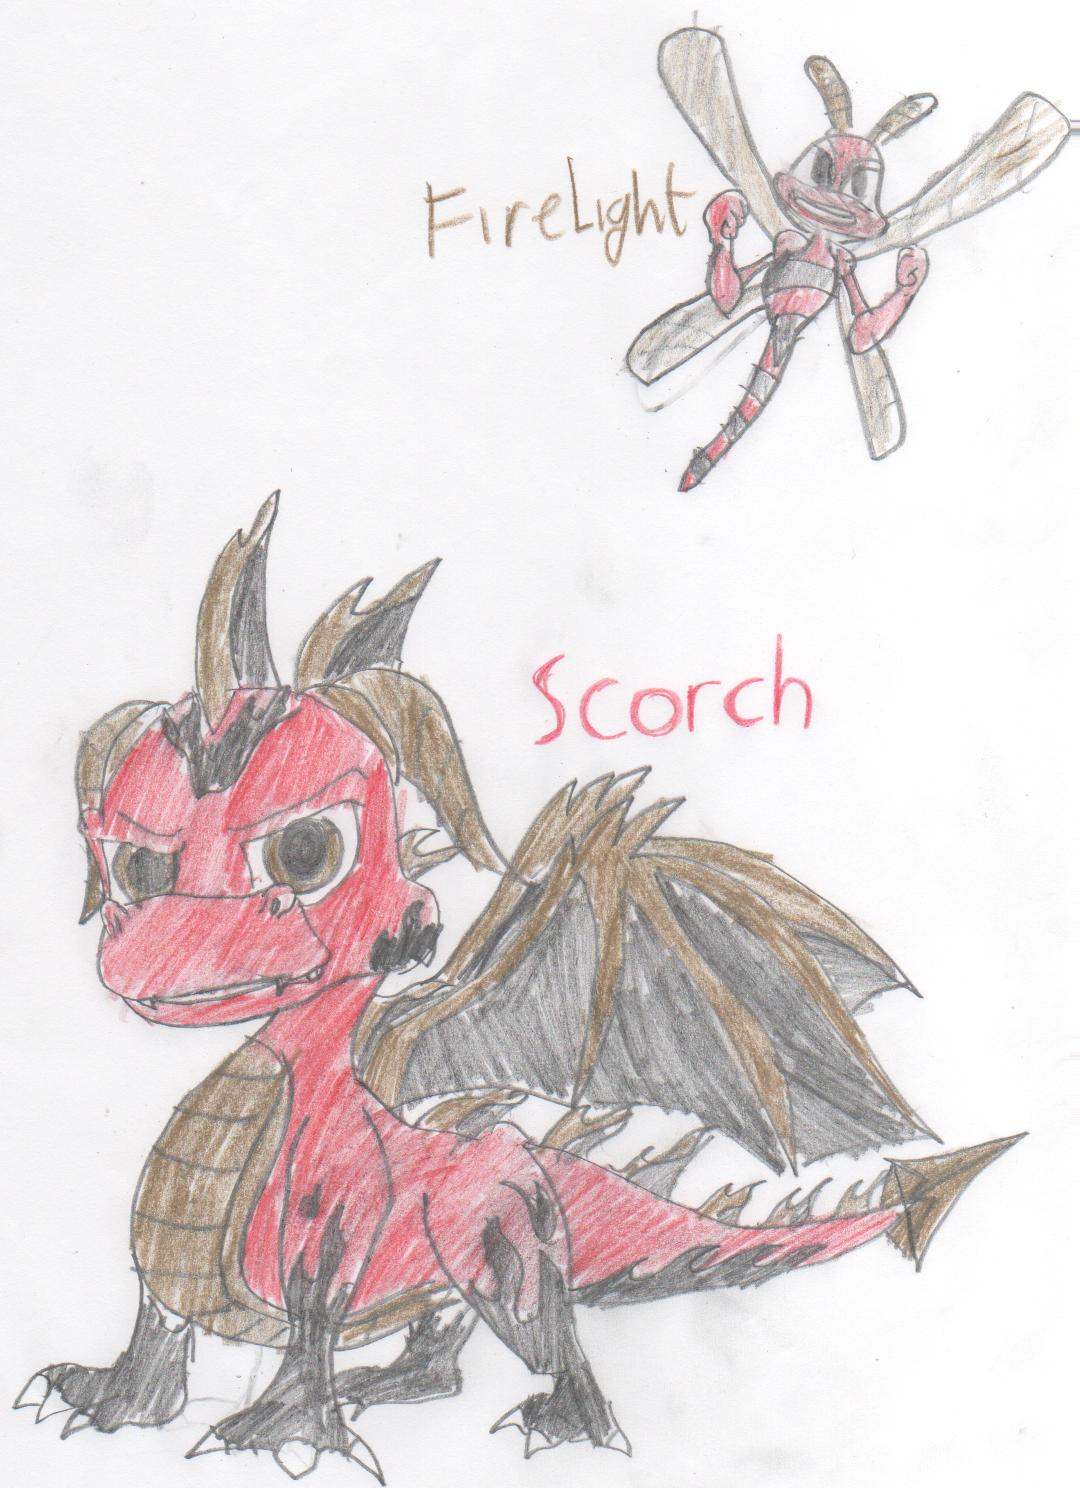 scorch and firelight (again) by jordanthehedgehog